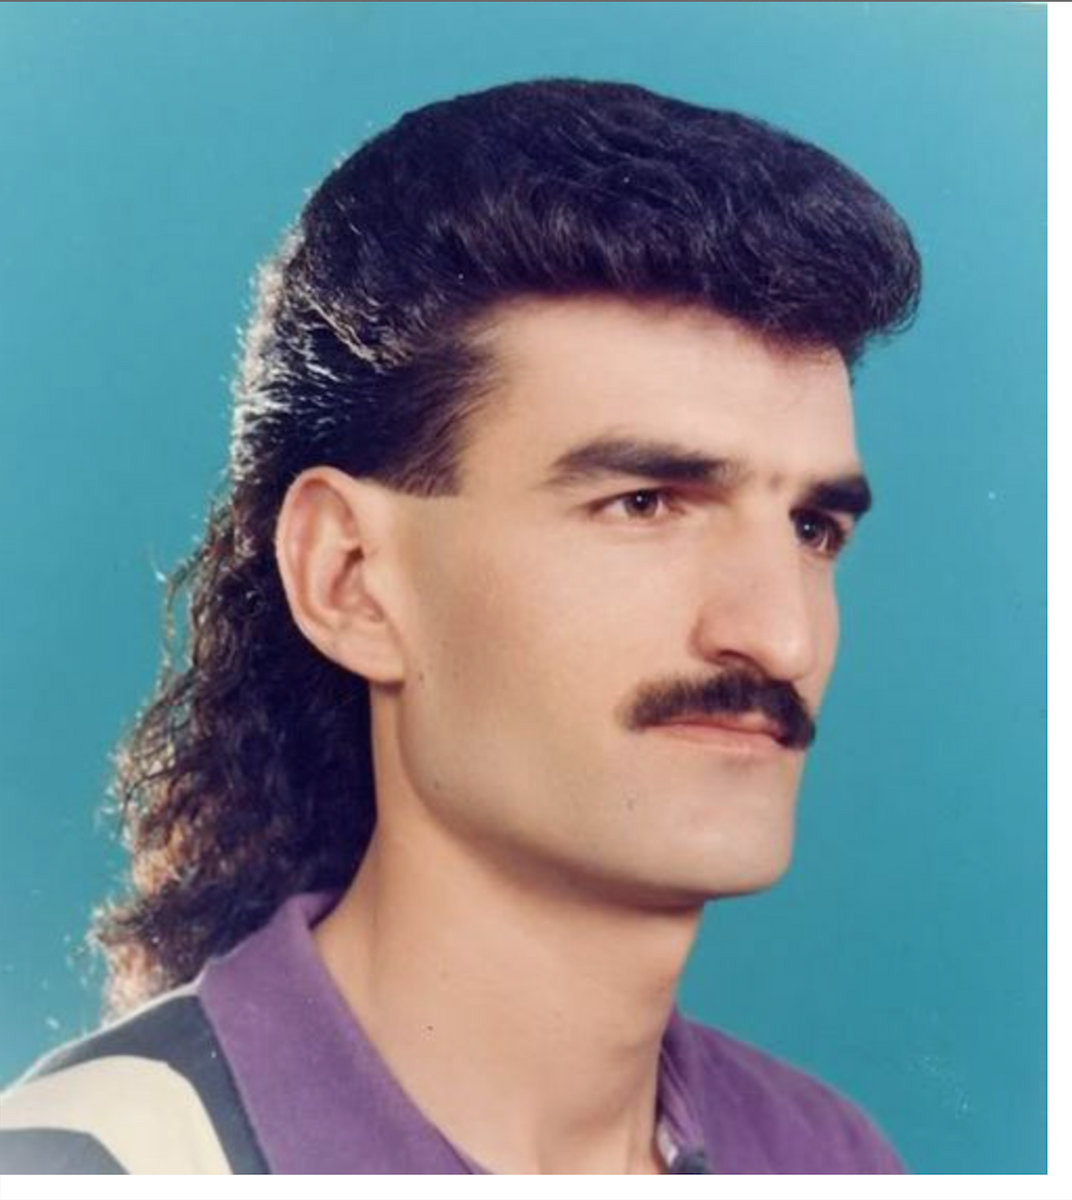 Awkward Vintage 80s Pictures That Will Make You Laugh And Cringe